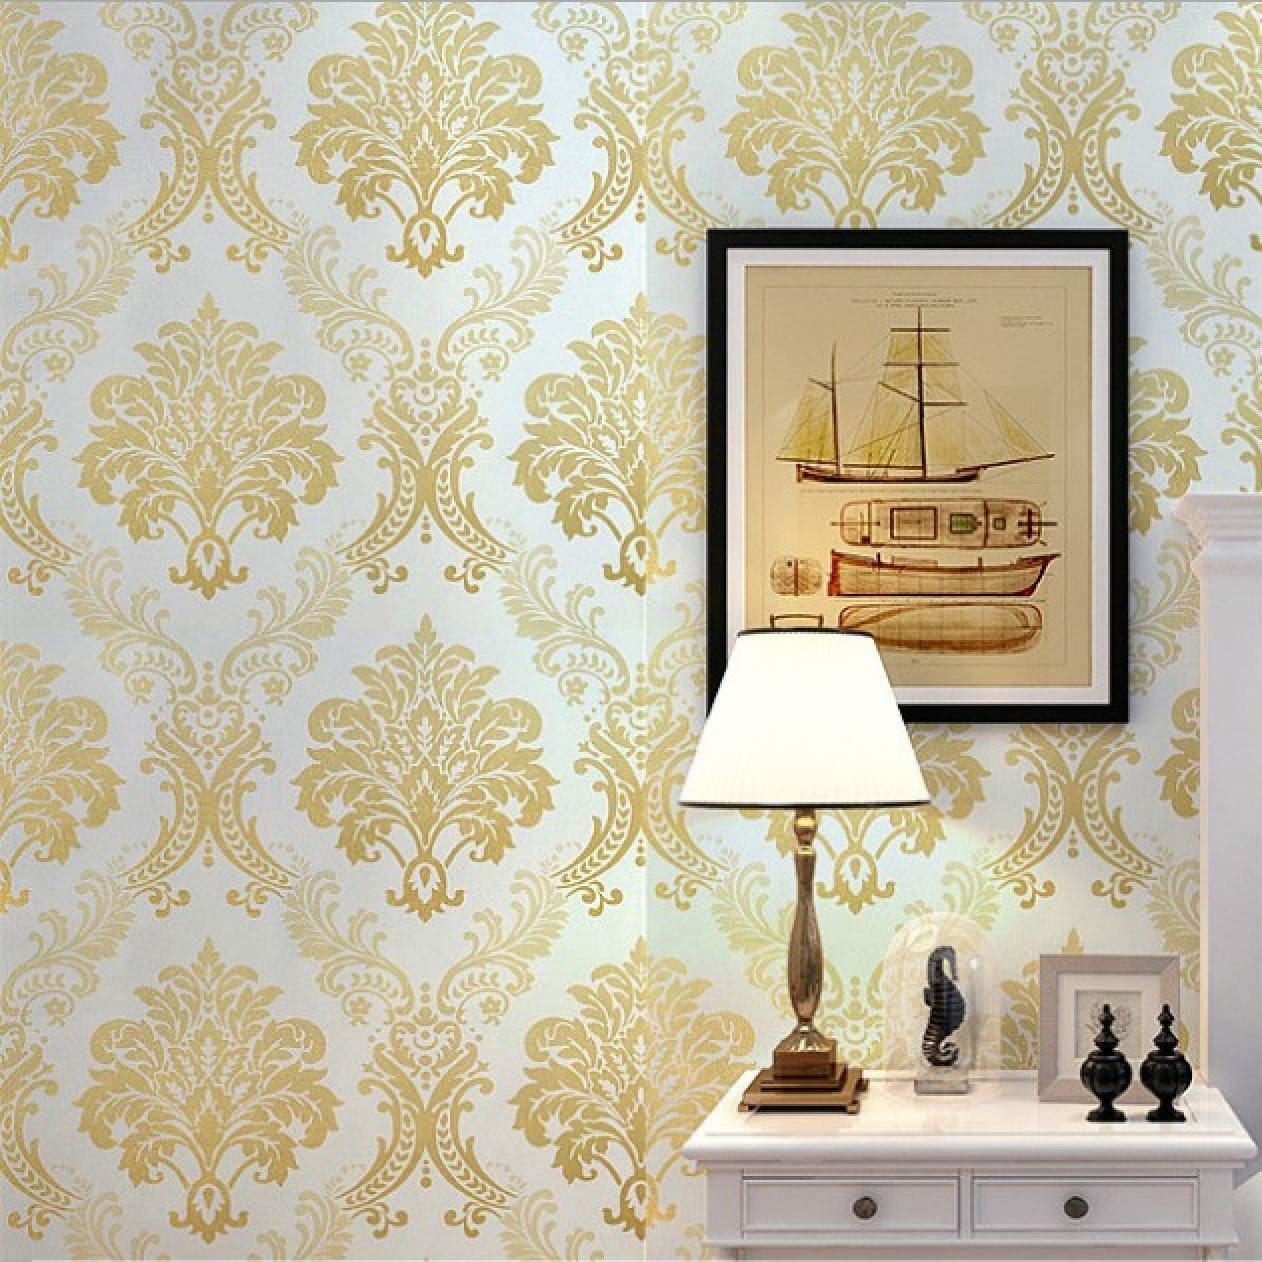 A white and golden floral wallpaper on a wall. There&#x27;s a white table placed in front of it, with a lamp and other showpieces. There&#x27;s a framed painting of a boat on the wall.